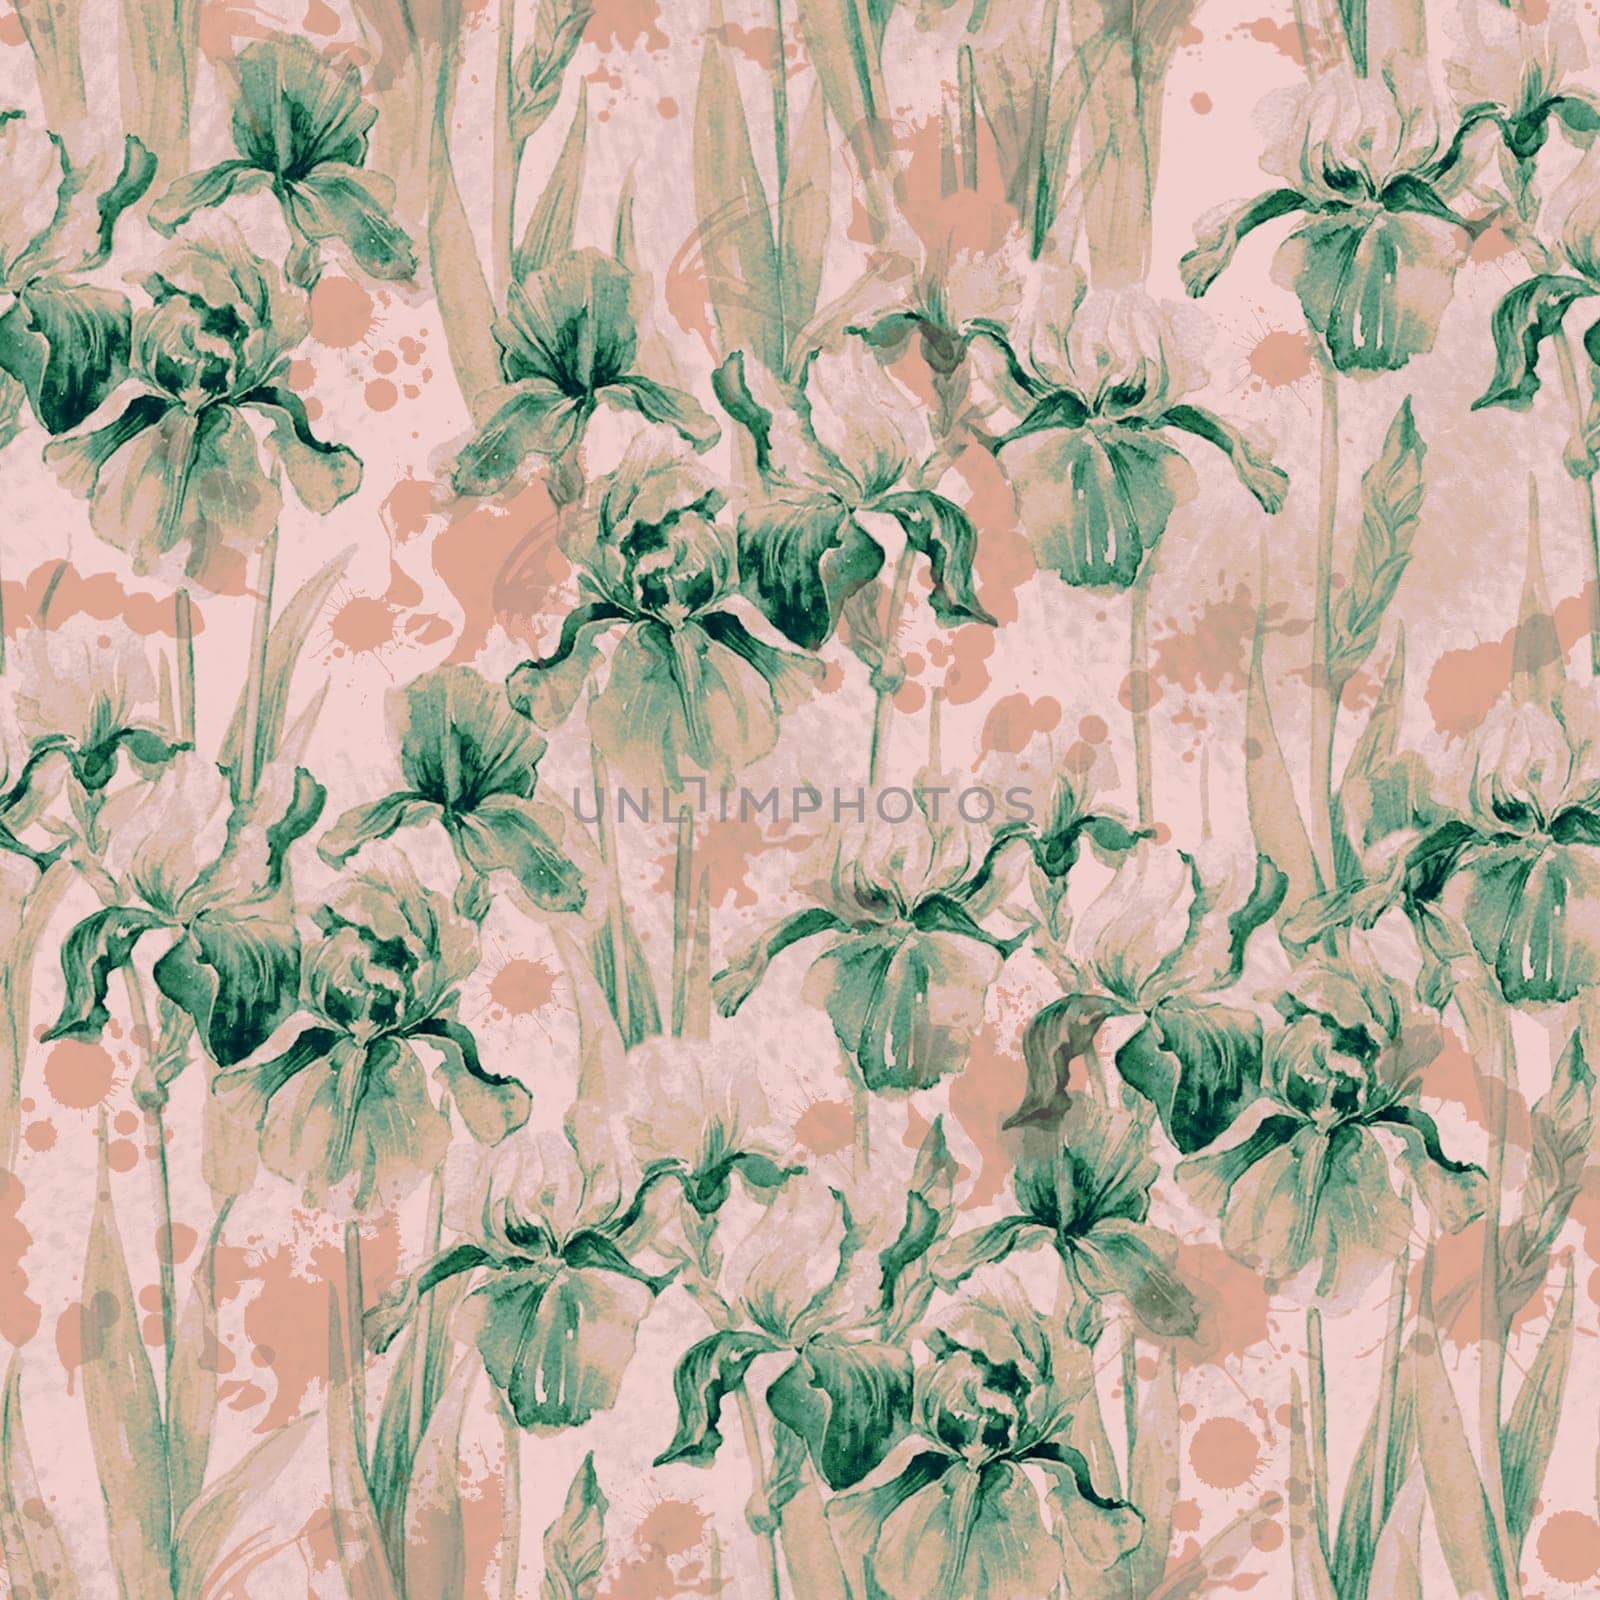 Seamless pattern with watercolor flowers. Hand drawn illustration.